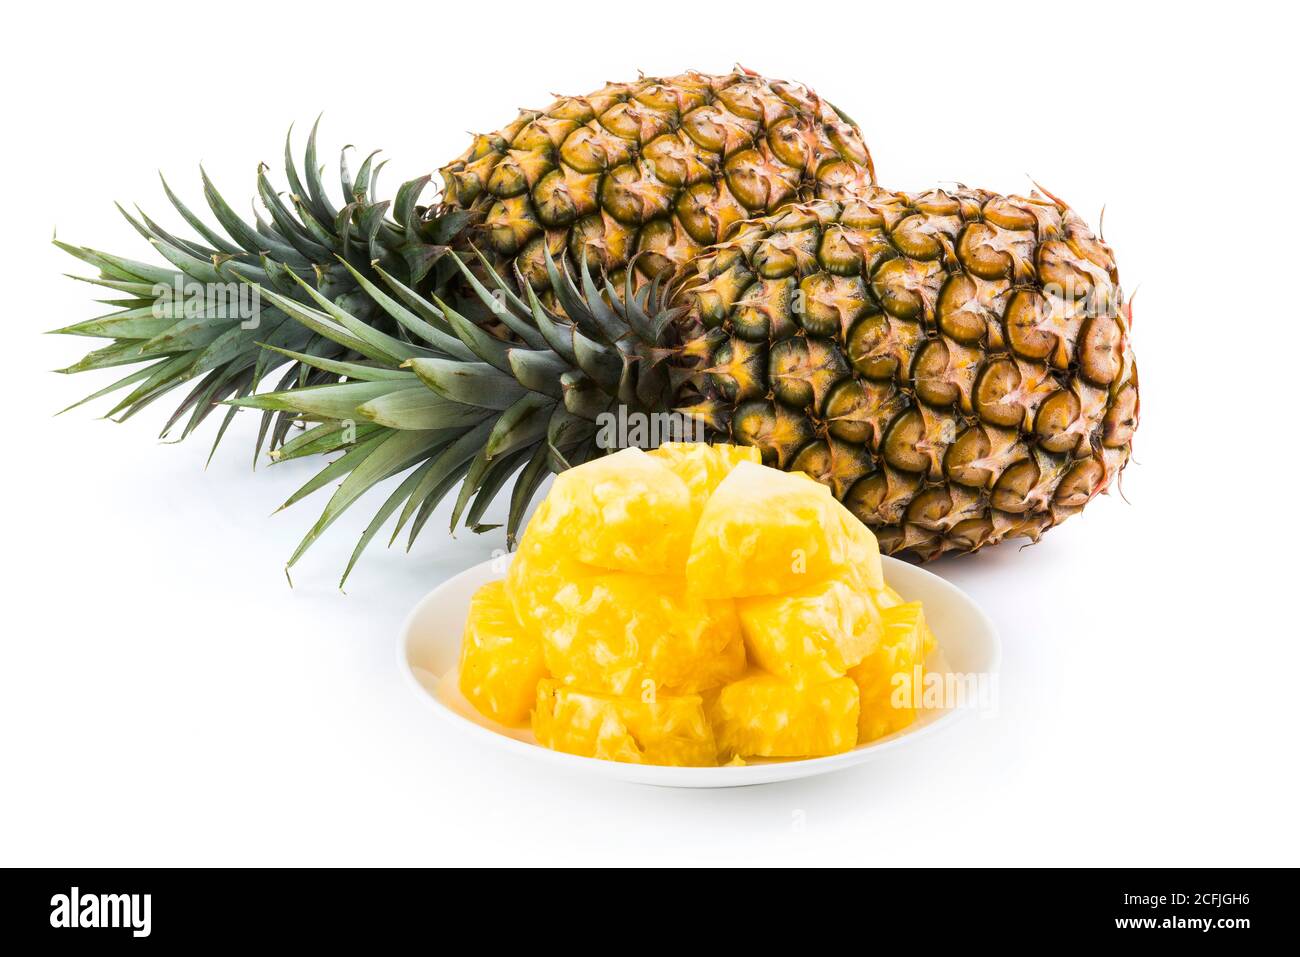 Sliced of pineapple on white background Stock Photo